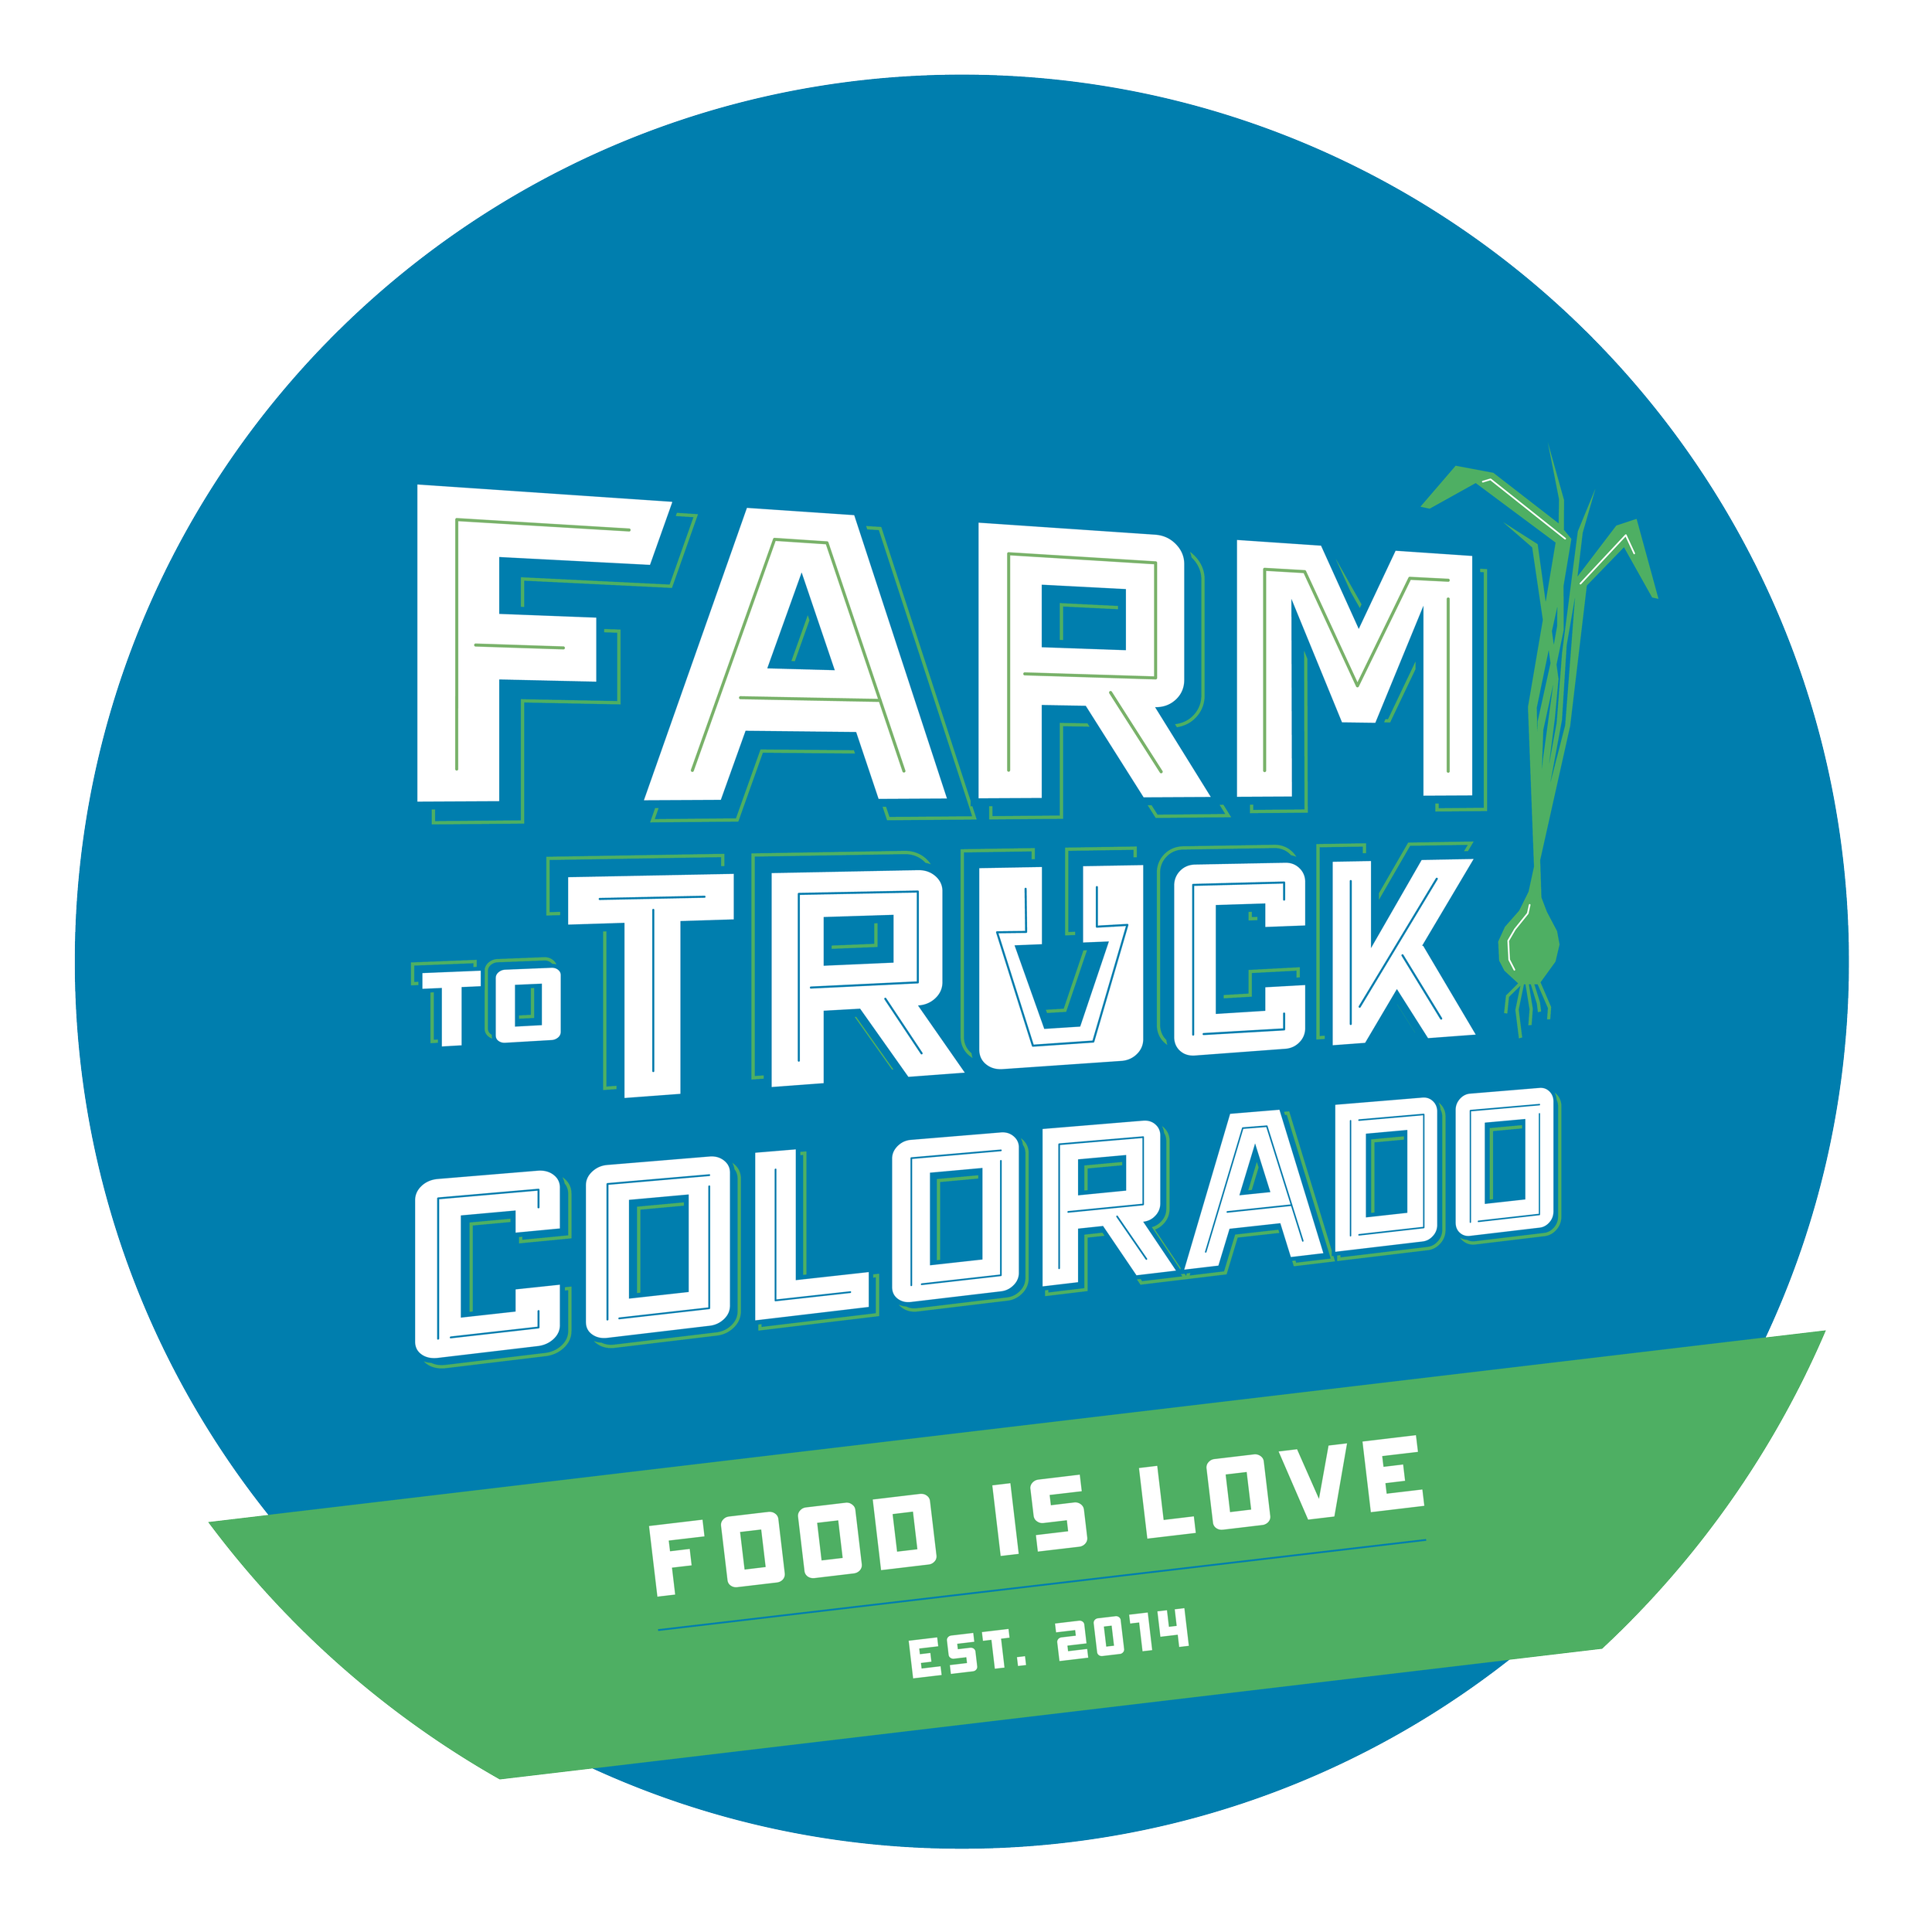 FarmToTruck_Logo+FoodIsLove+Est2014_Stamp_Secondary_7500px.png